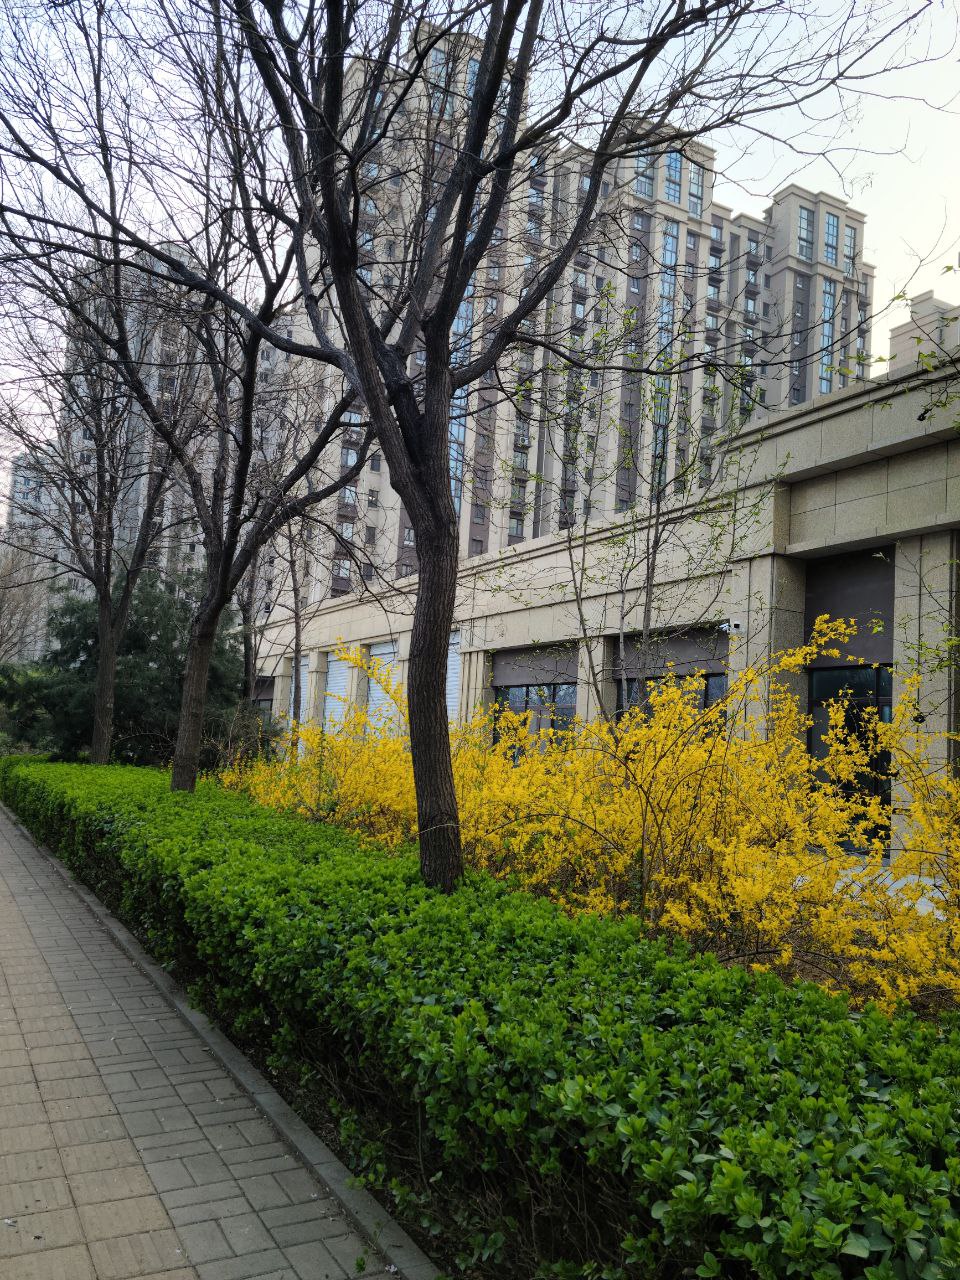 a path with trees and plants by a building